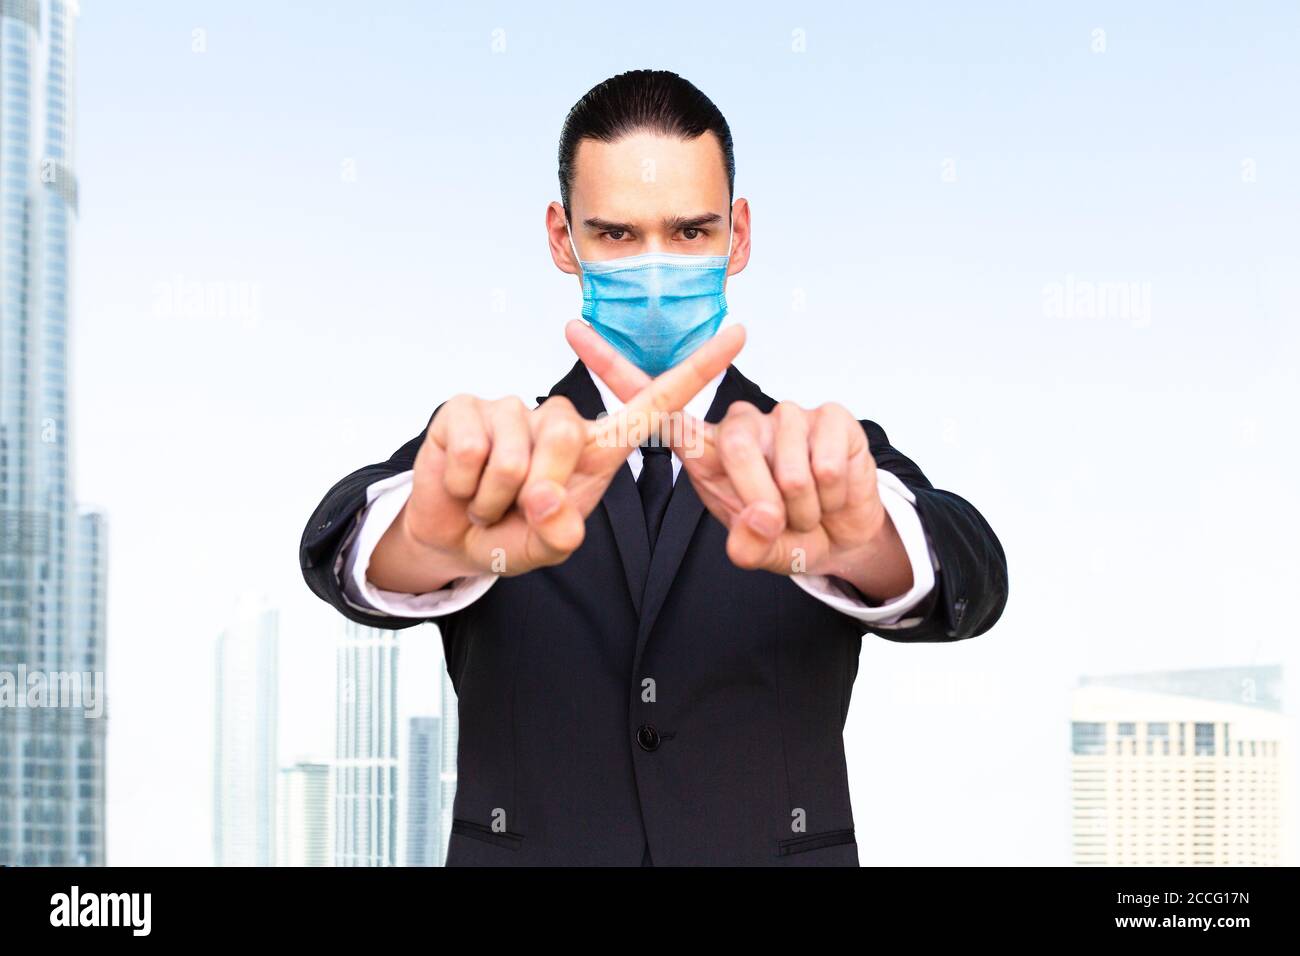 Prohibit & forbid. Businessman agent doing a ban hand gesture at the camera wearing a medical face mask and suit with the city in the background. Stock Photo